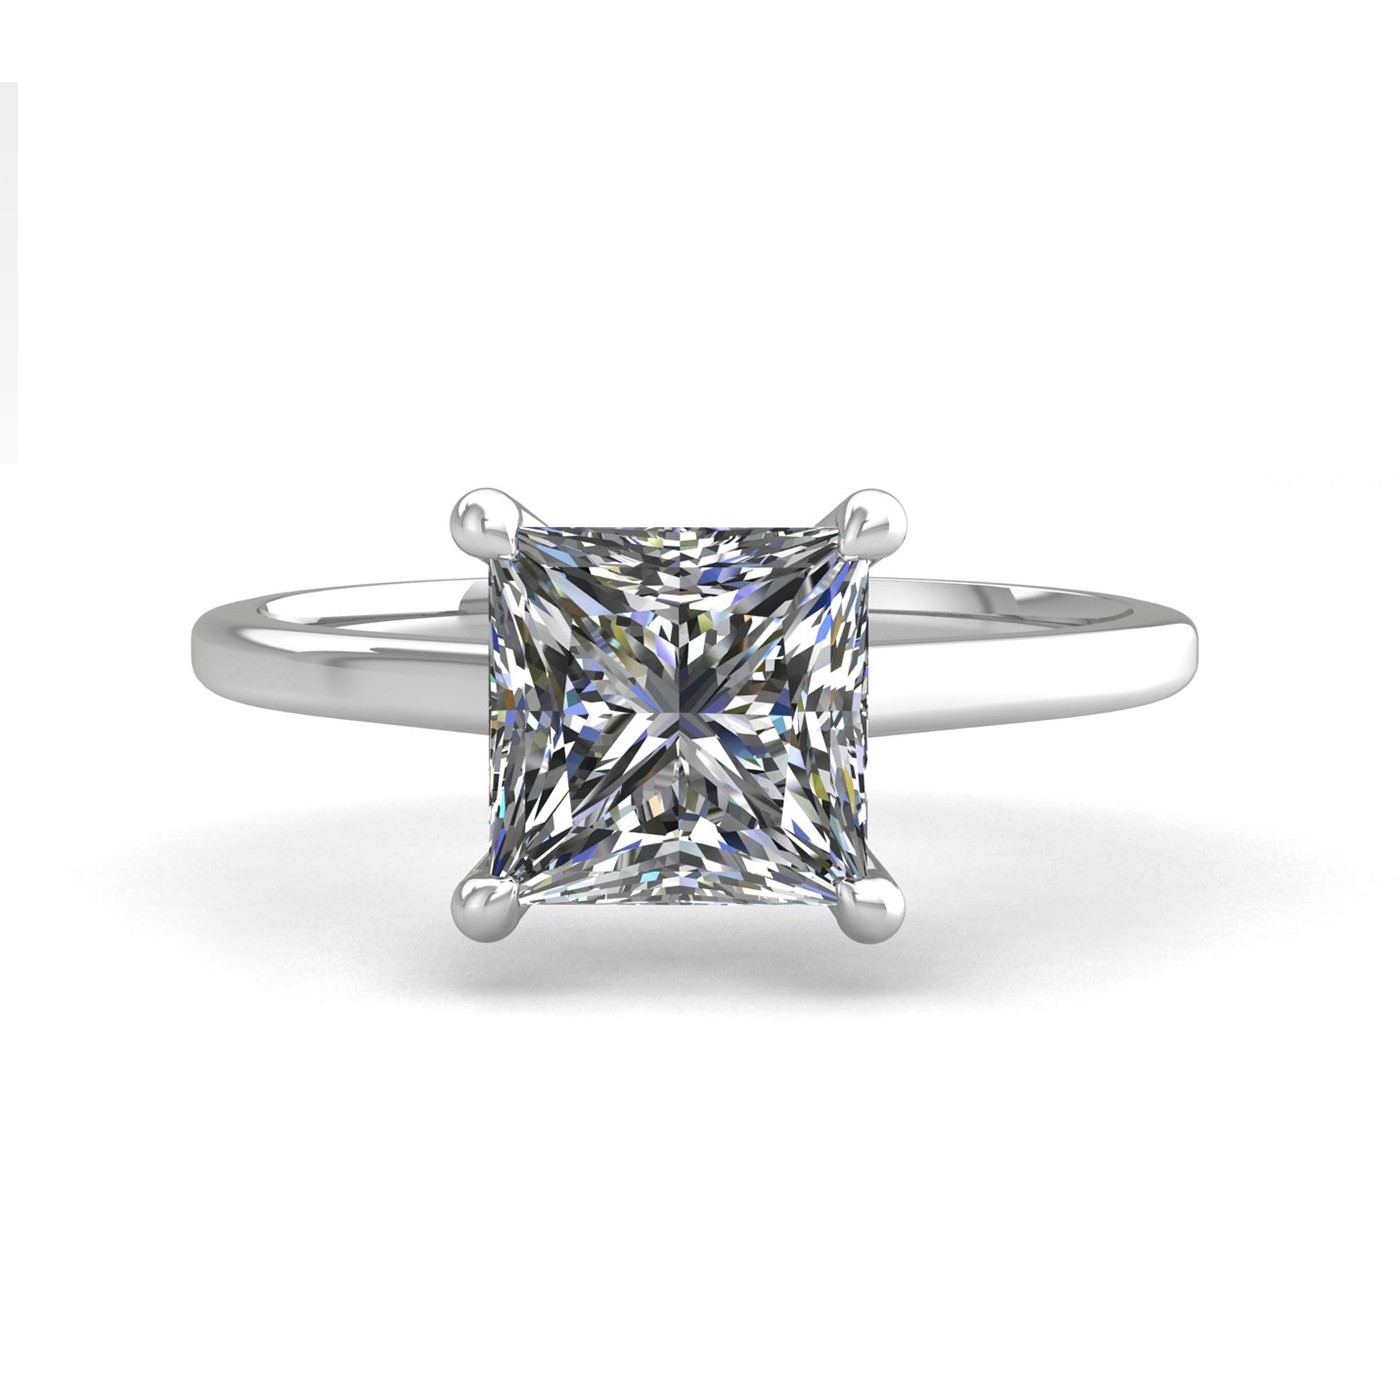 18k white gold  1,00 ct 4 prongs solitaire princess cut diamond engagement ring with whisper thin band Photos & images